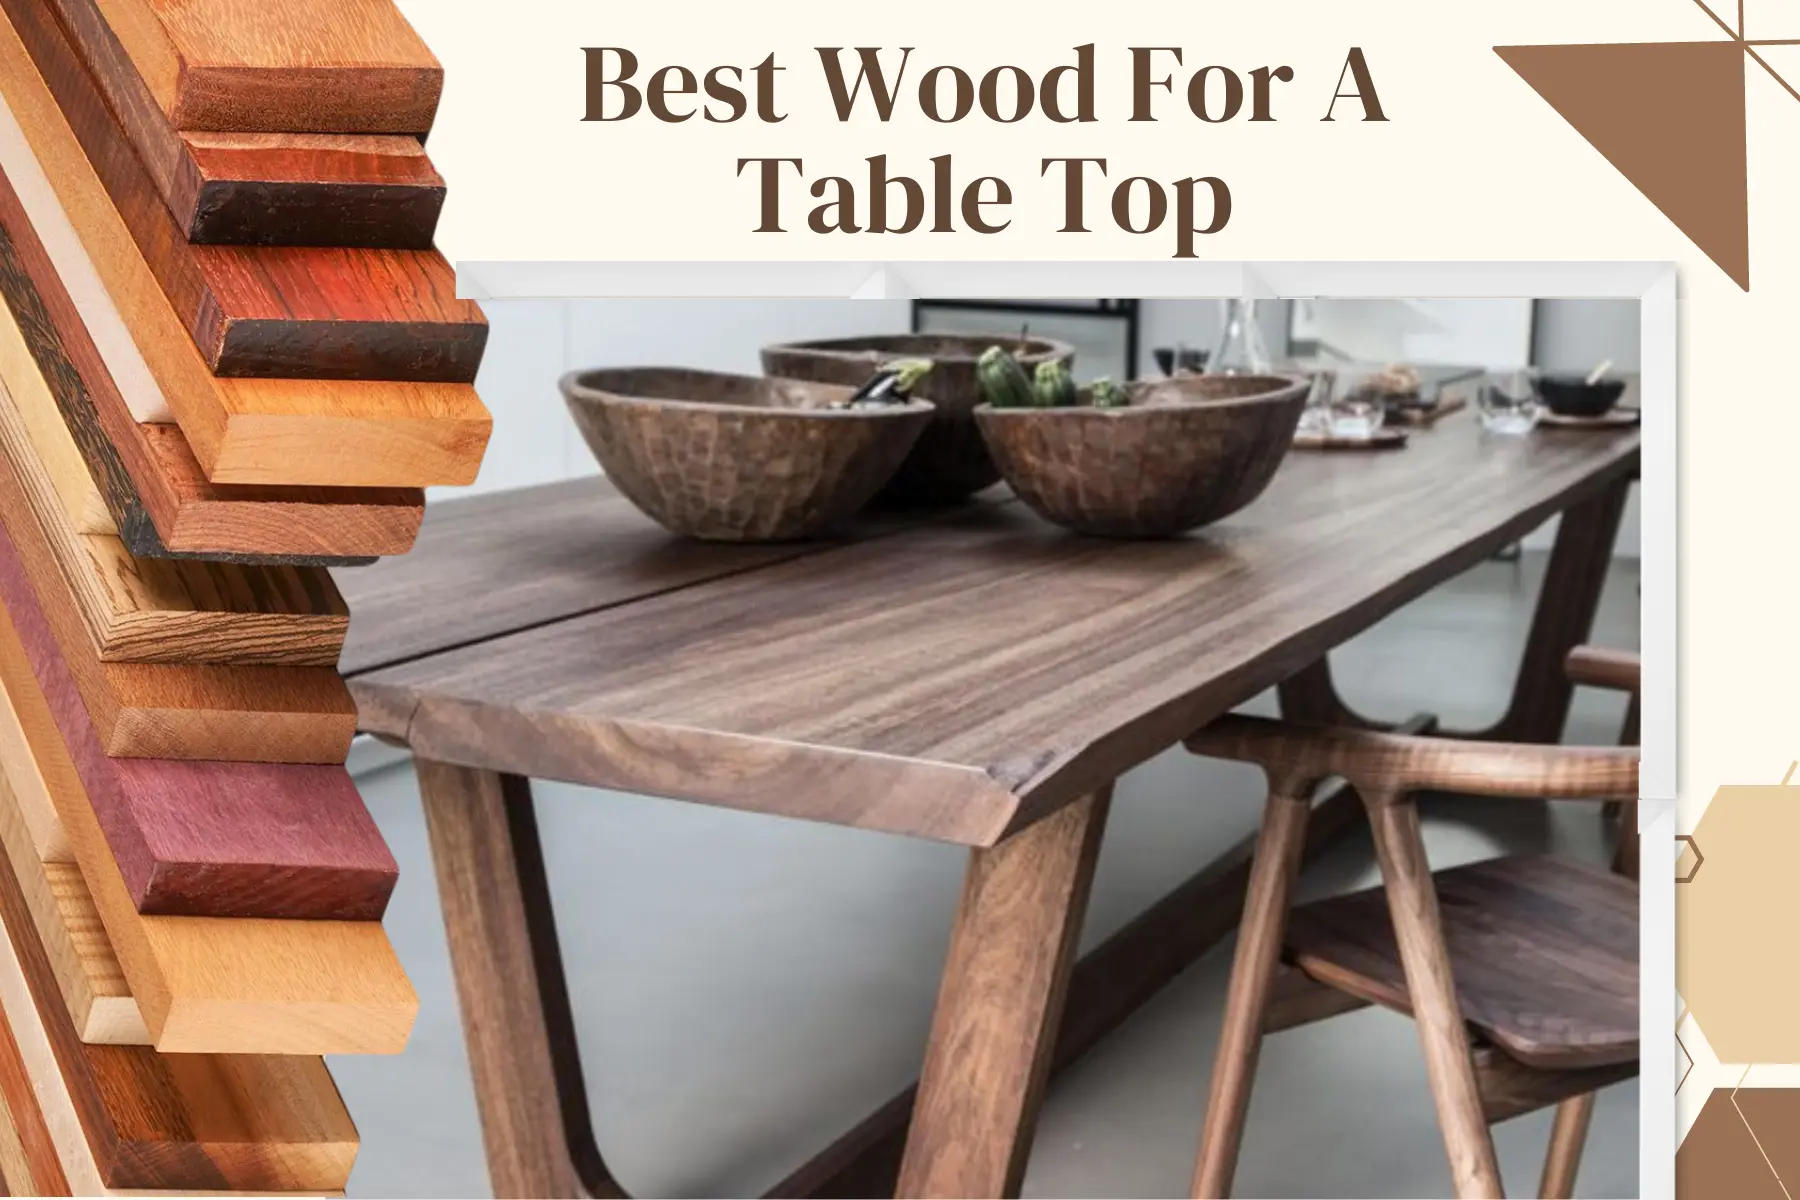 Best Wood for a Table Top